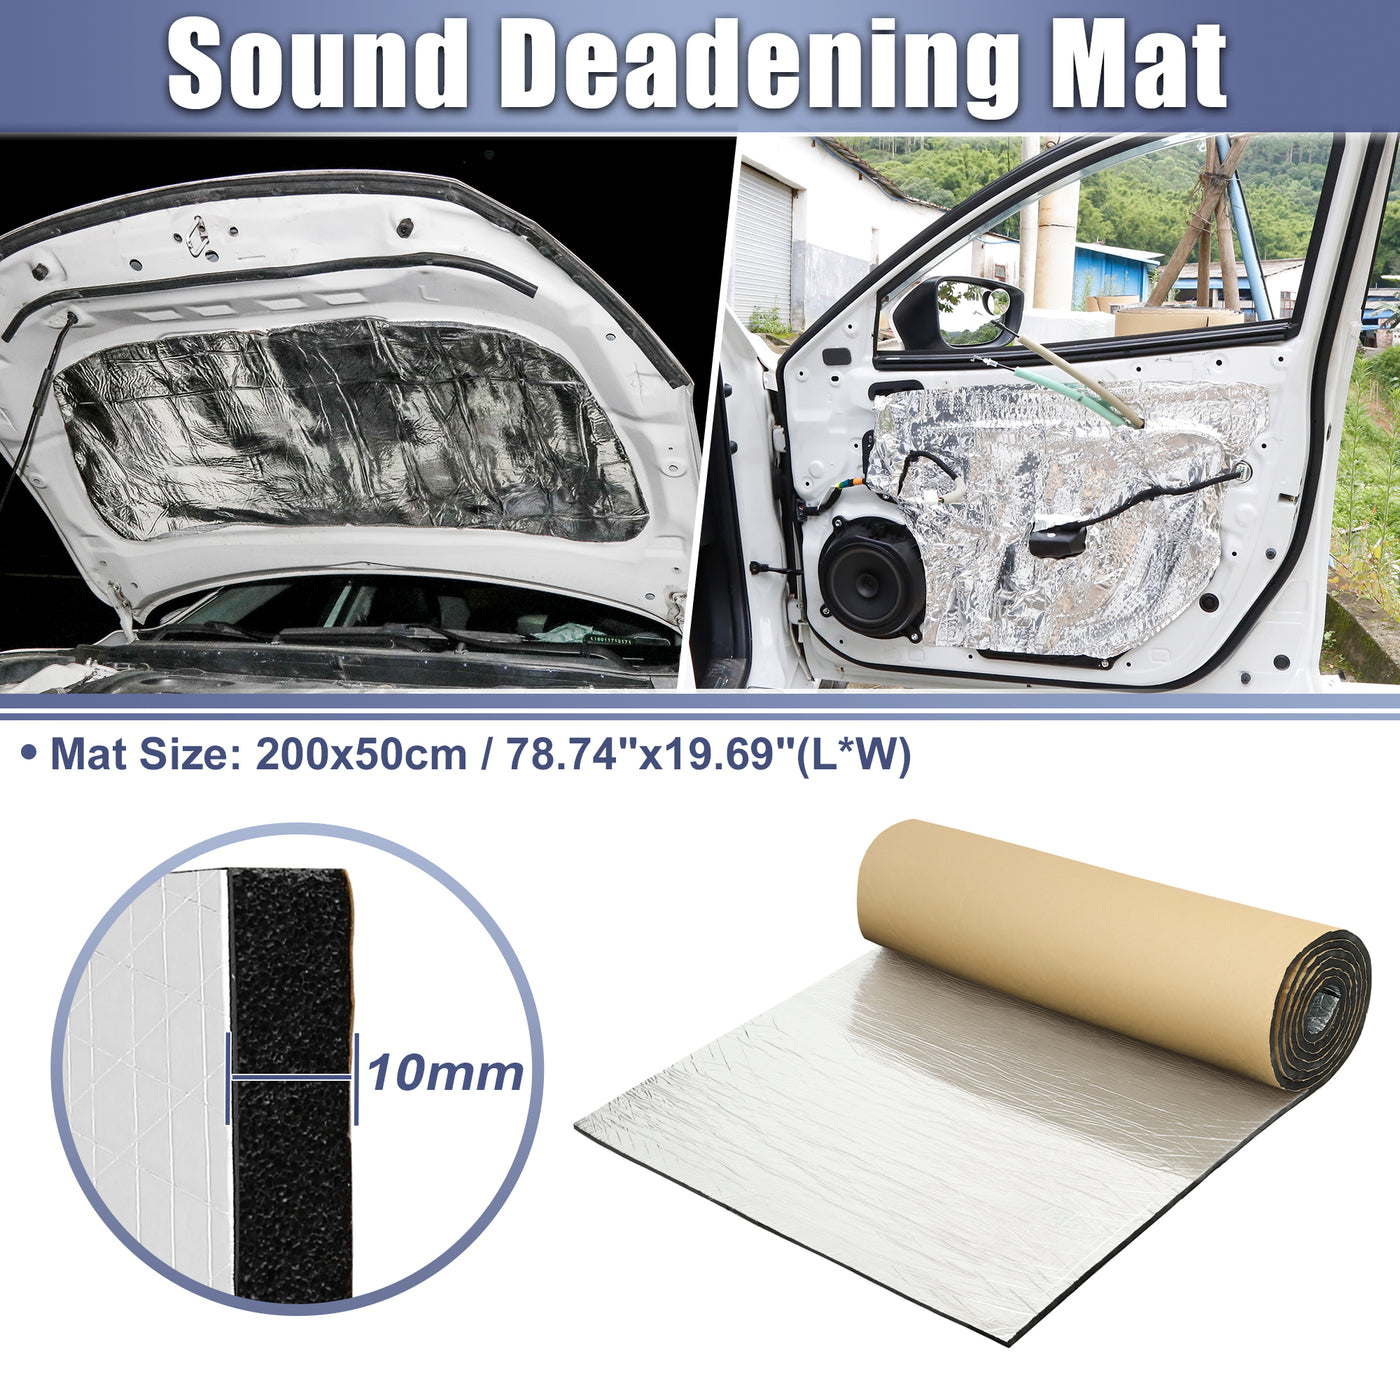 X AUTOHAUX 394mil 10mm 10.76sqft Car Sound Deadening Mat Aluminum Foil Closed Cell Foam Heat Shield Material Damping Self Adhesive Universal for Hood Fender Boat Engine Cover 78.74"x19.69"